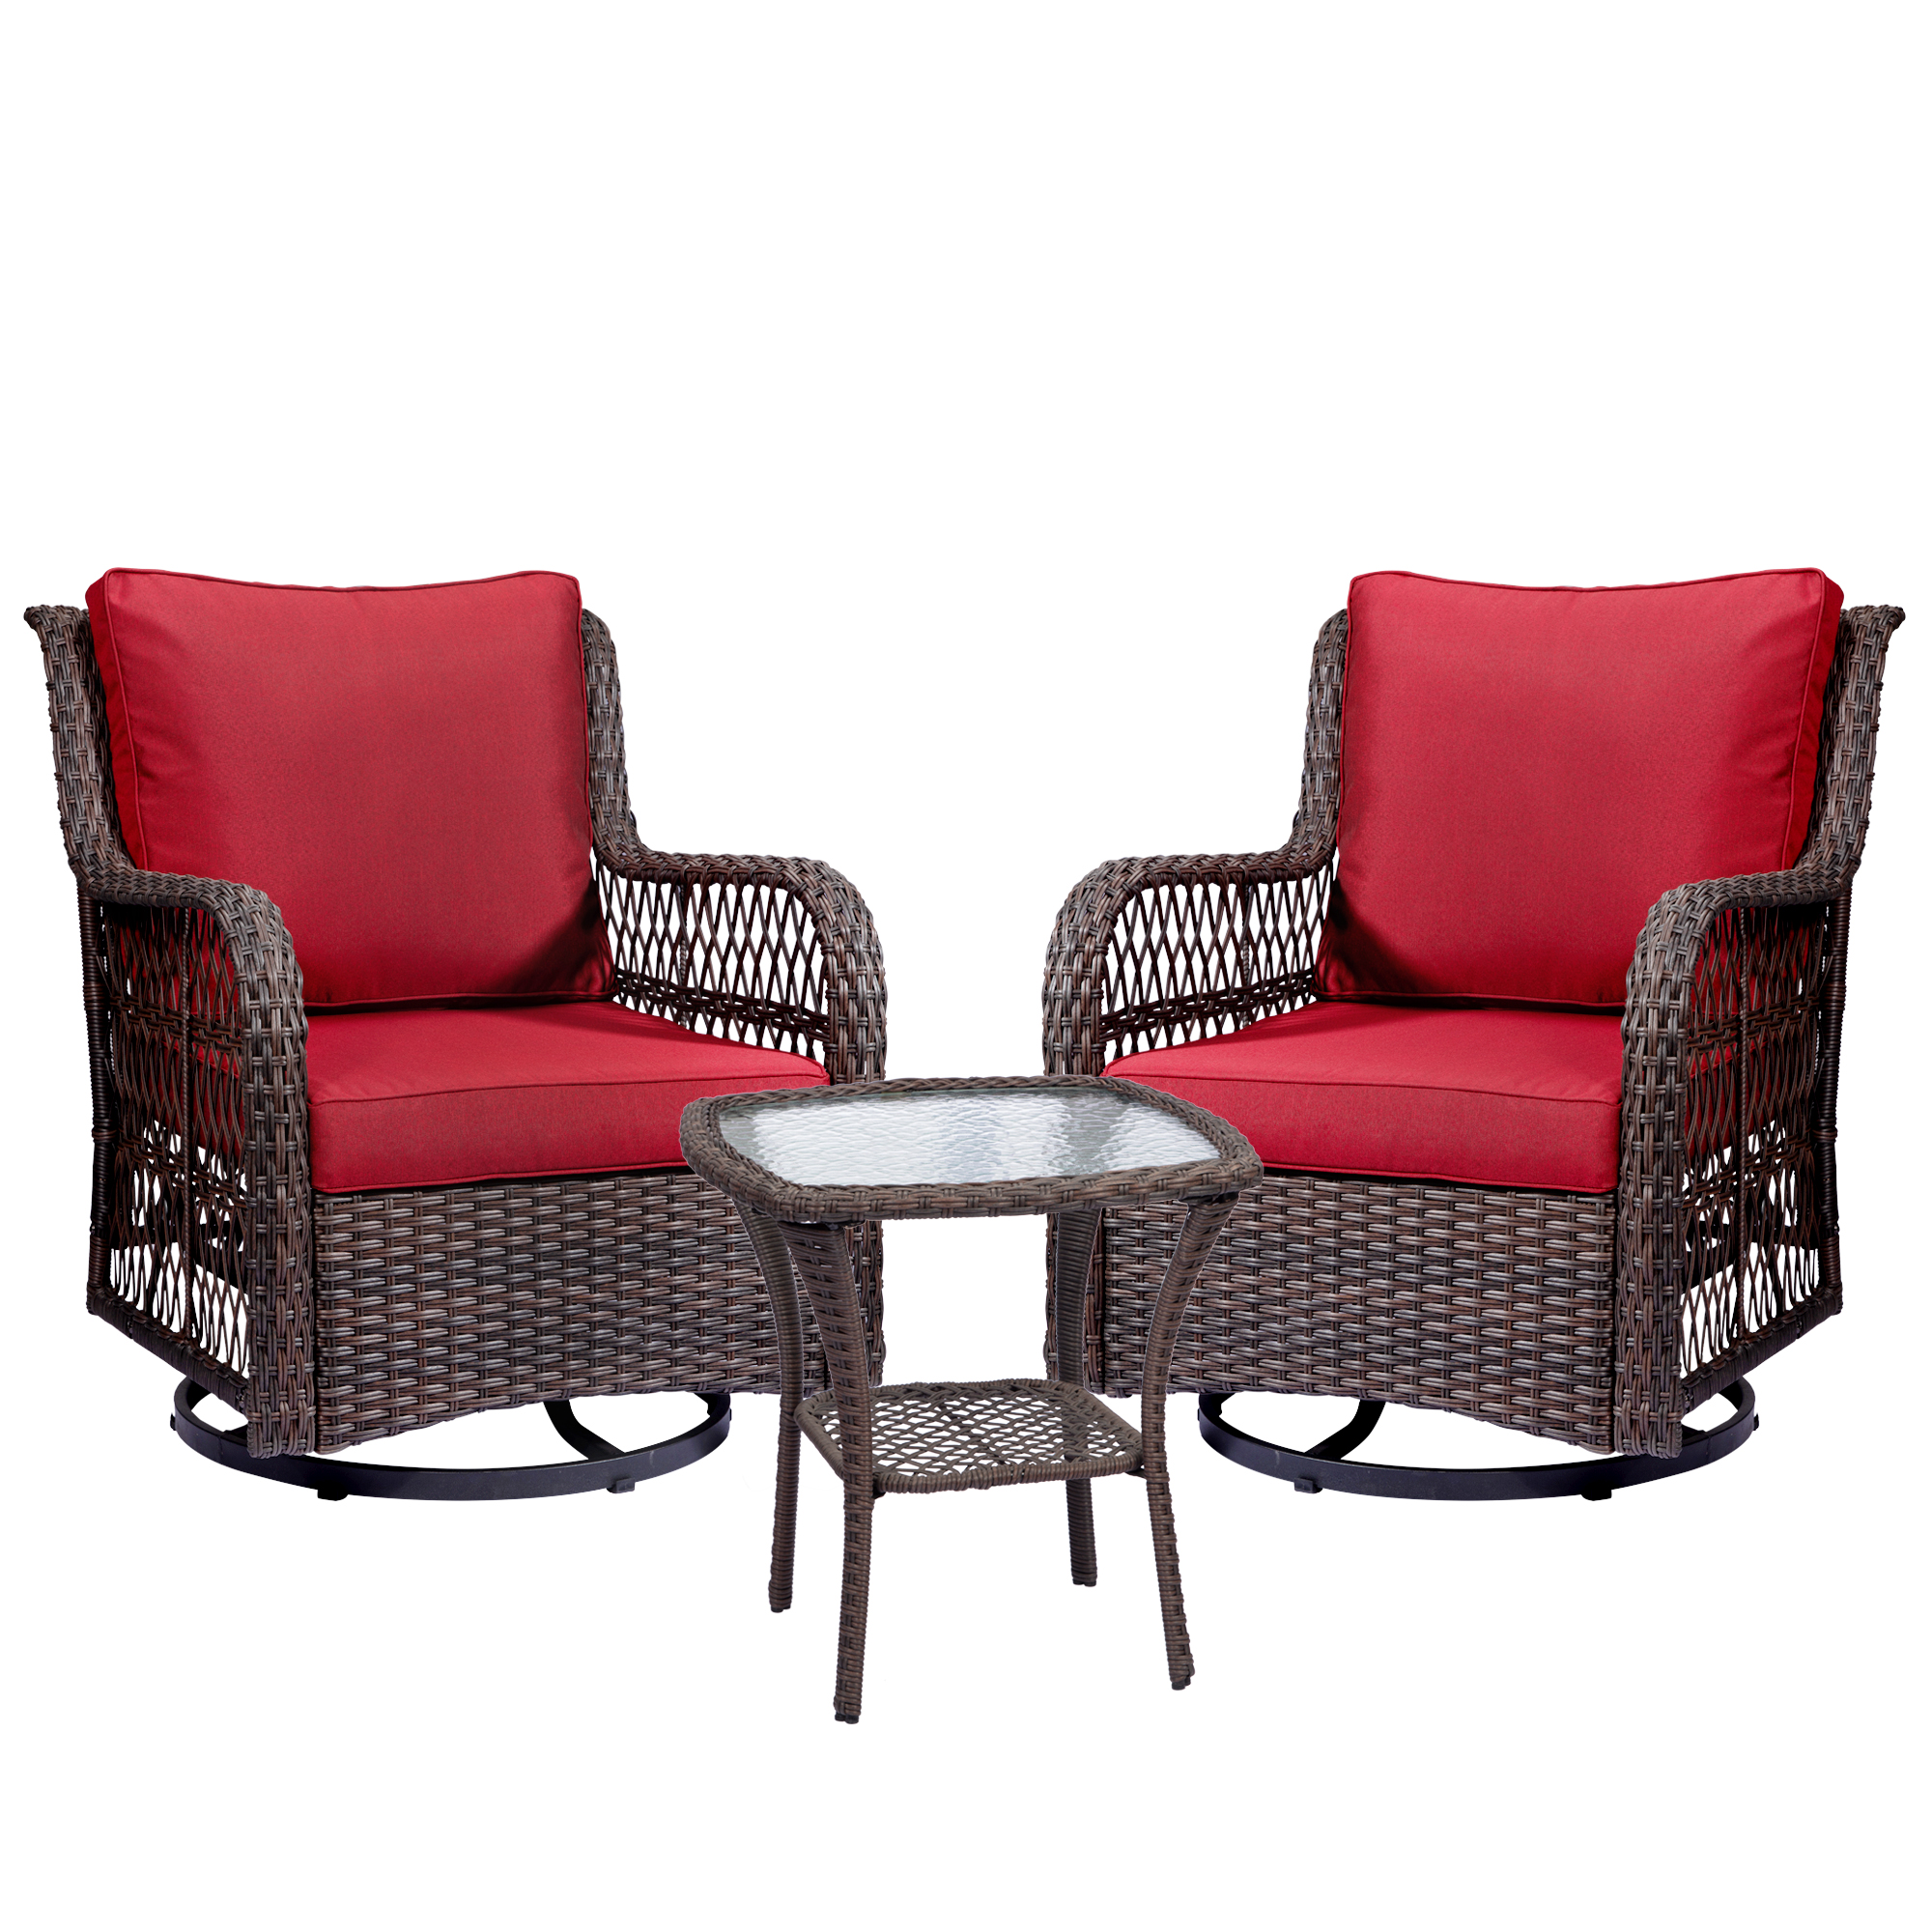 3 Pieces Outdoor Swivel Rocker Patio Chairs Set with Cushion,2PCS 360° Swivel Rocking Patio Chairs and 1PC Matching Side Table for Outside Backyard Garden Rust Red - image 1 of 7